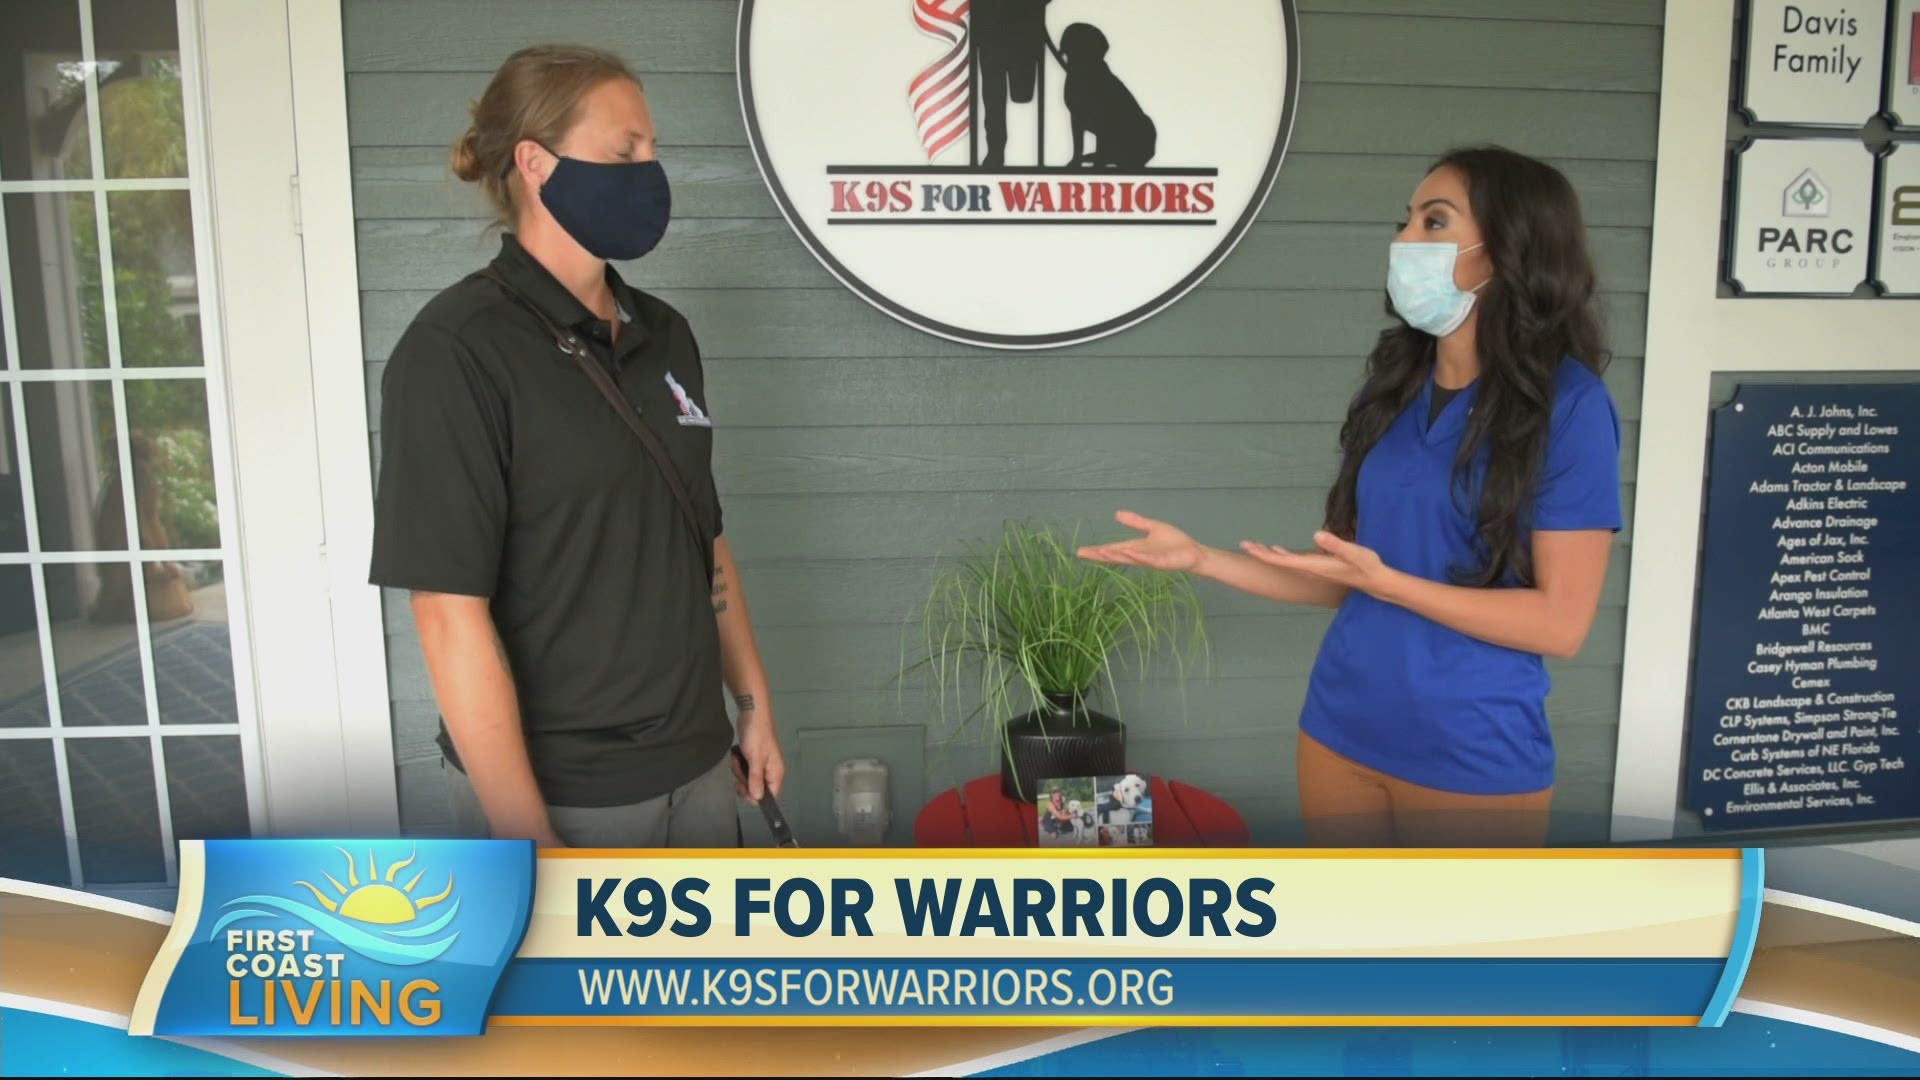 First Coast News is teaming up with K9s For Warriors this Veterans Day to help raise money that will go directly to helping veterans in need.